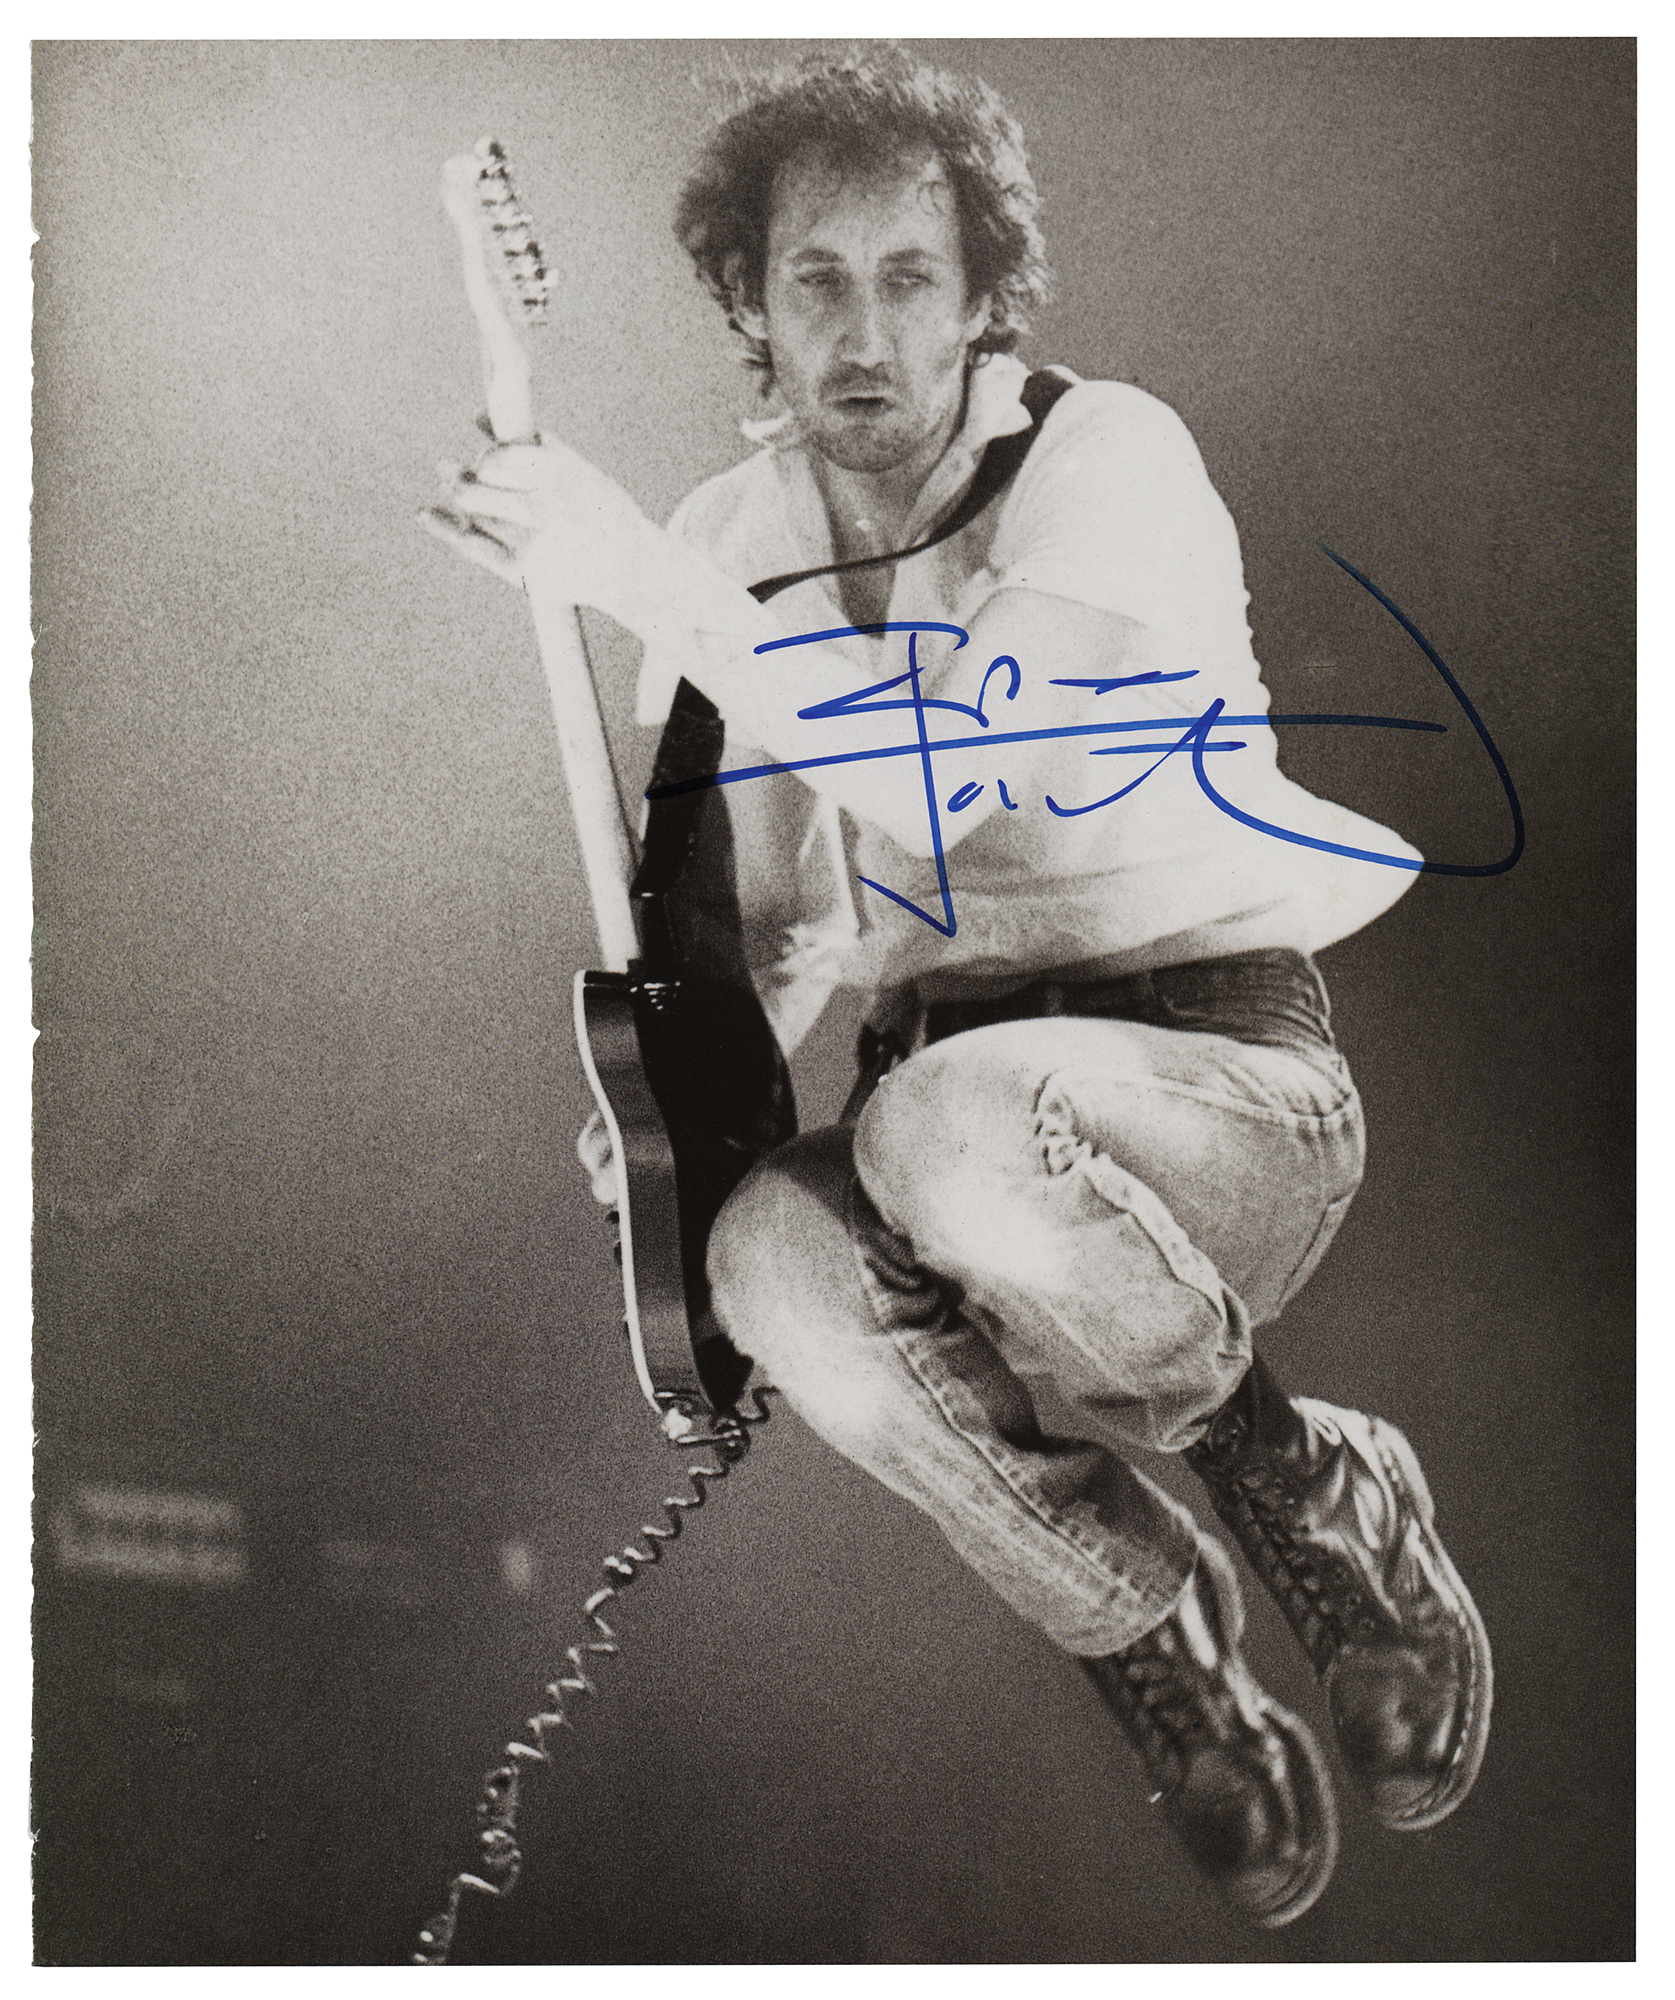 Lot #669 The Who: Pete Townshend Signed Photograph